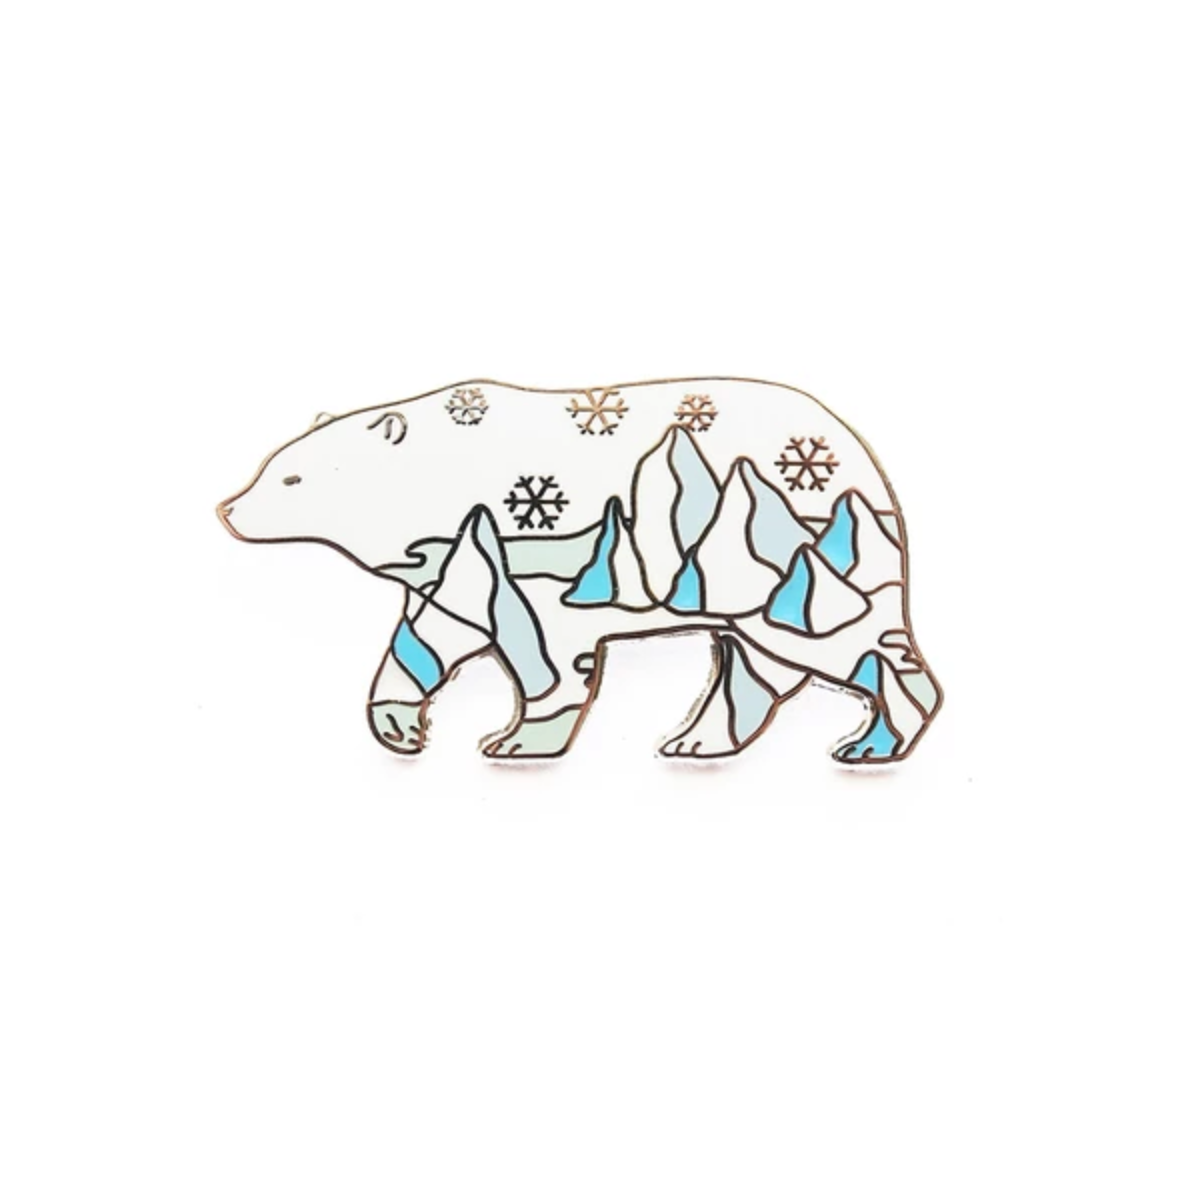 by SHOAL. One hard enamel Polar Bear Pin. Shiny silver metal finish. One rubber pin back. "Natelle Draws Stuff" stamped on reverse Measures 1.25-inch (32mm). Also available in store at FOLD Gallery DTLA.